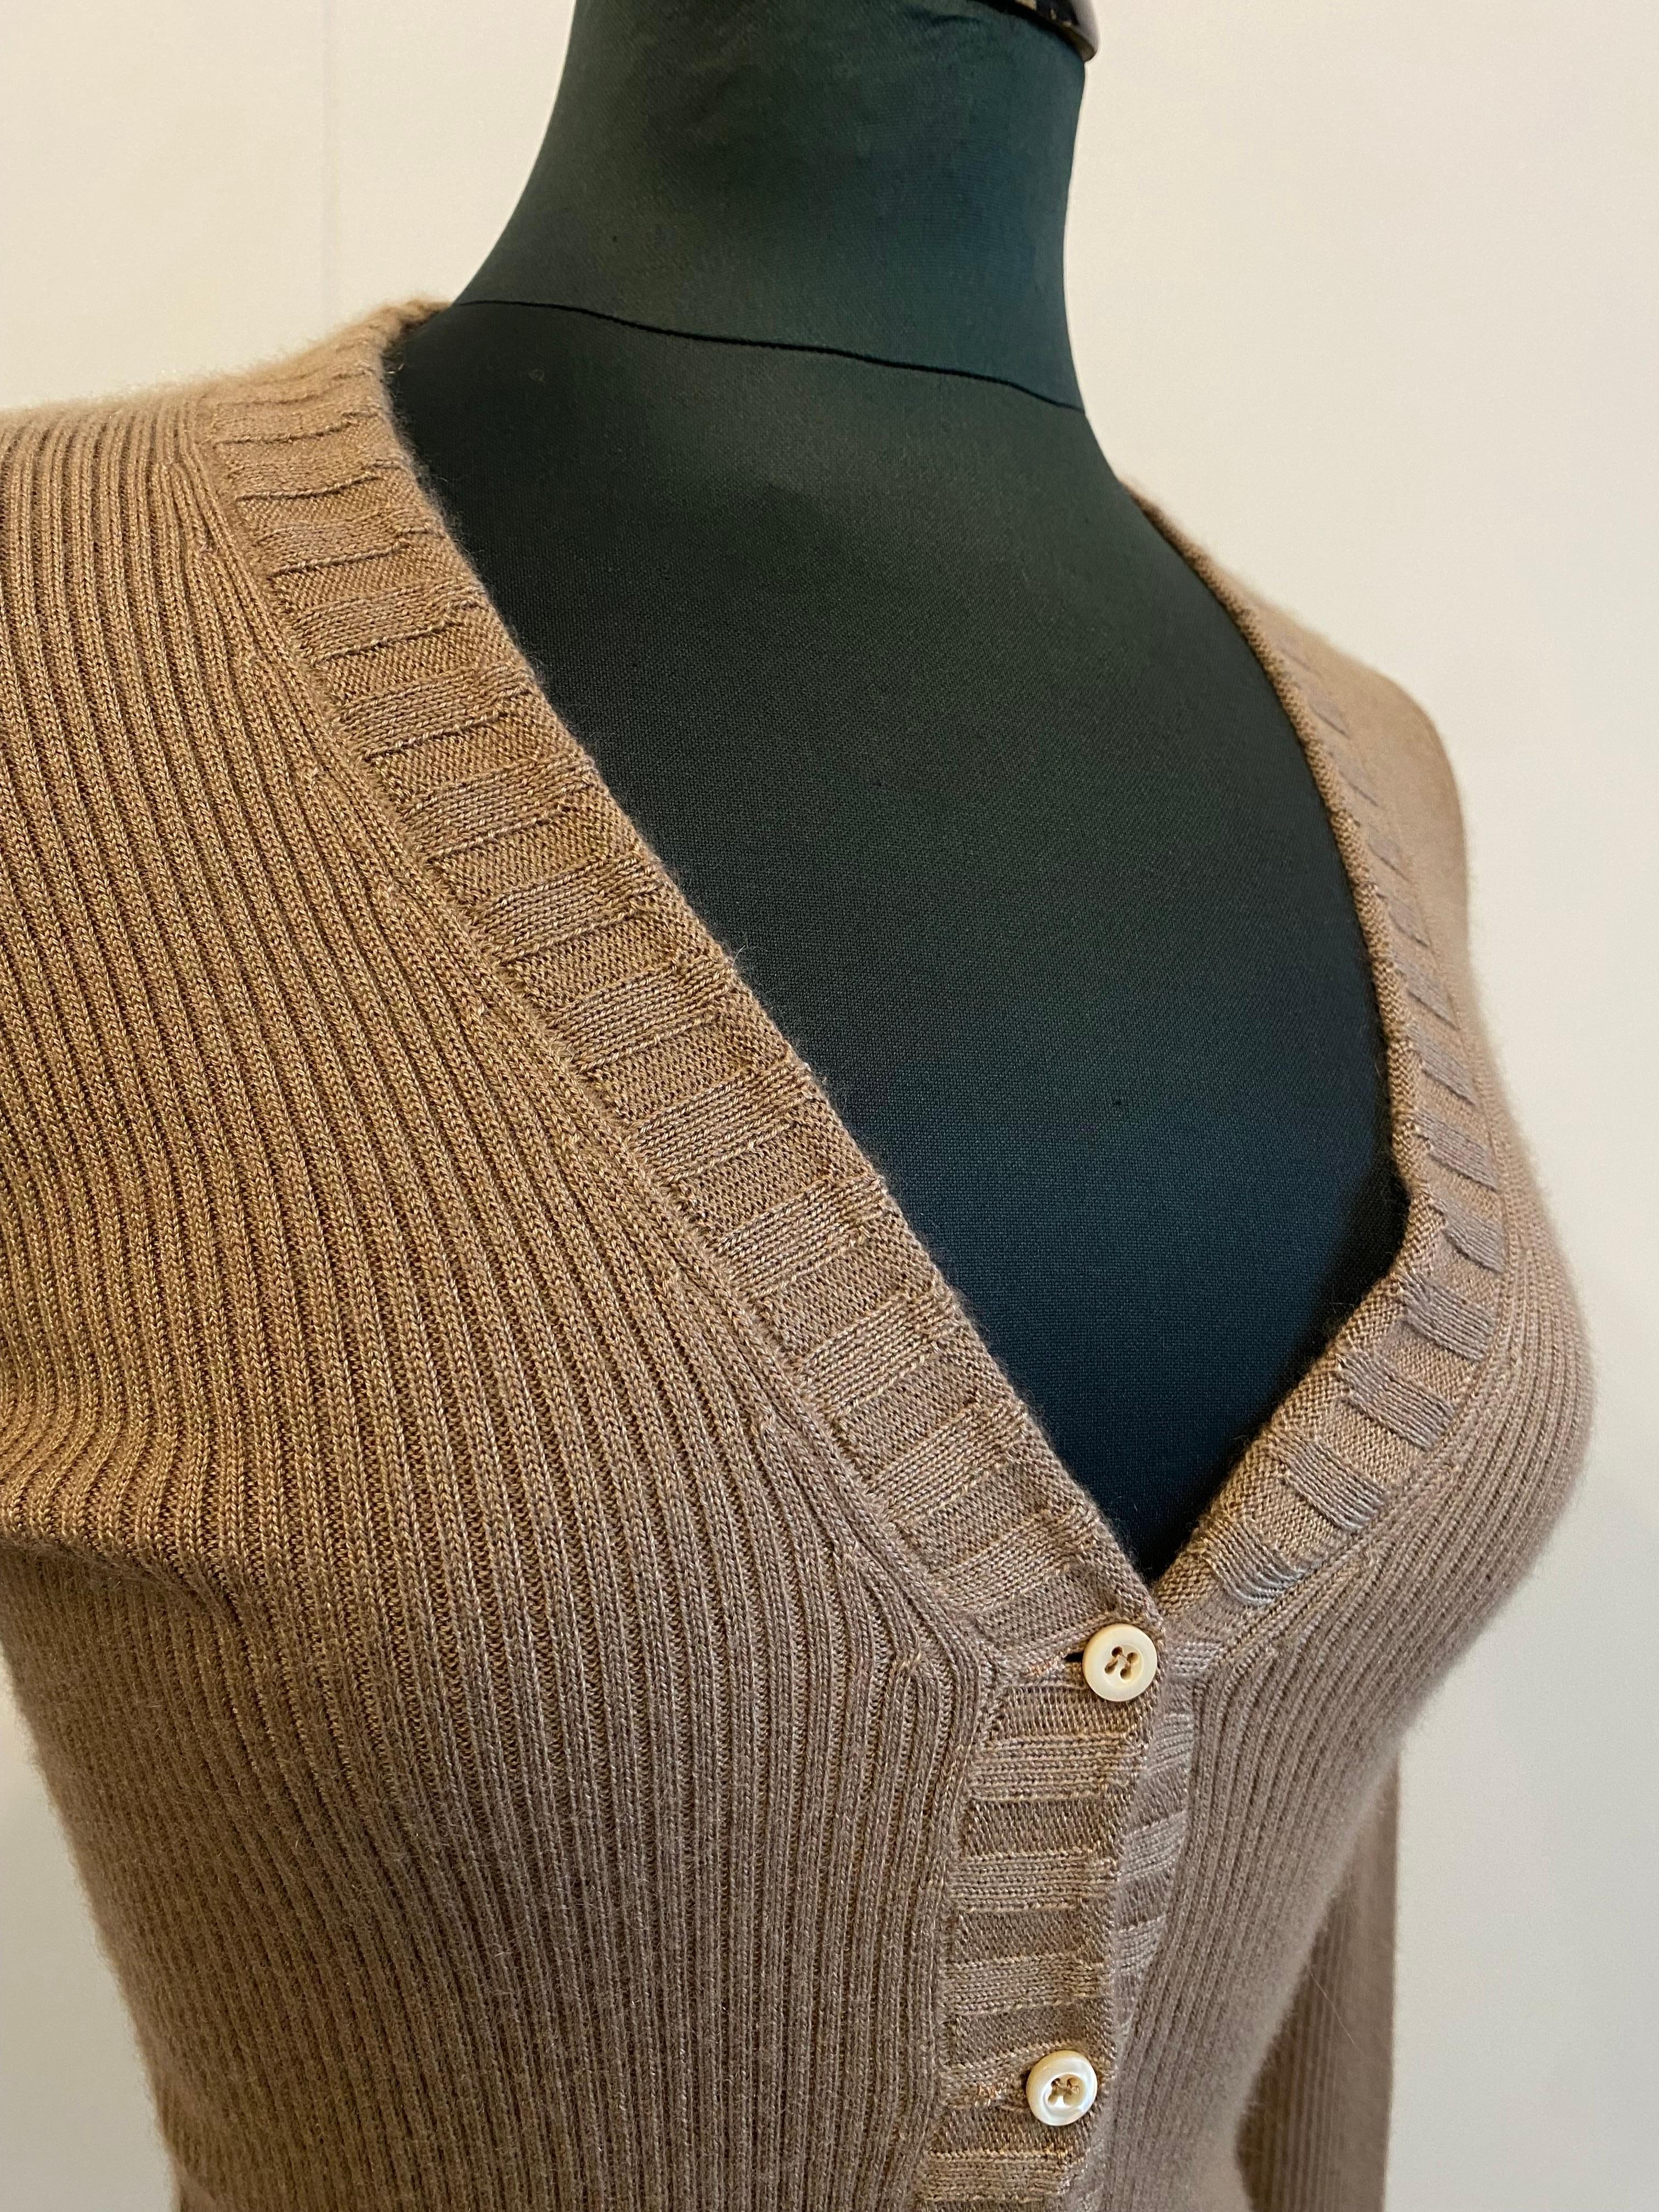 Cashmere Cardigan Prada  In Excellent Condition For Sale In Carnate, IT